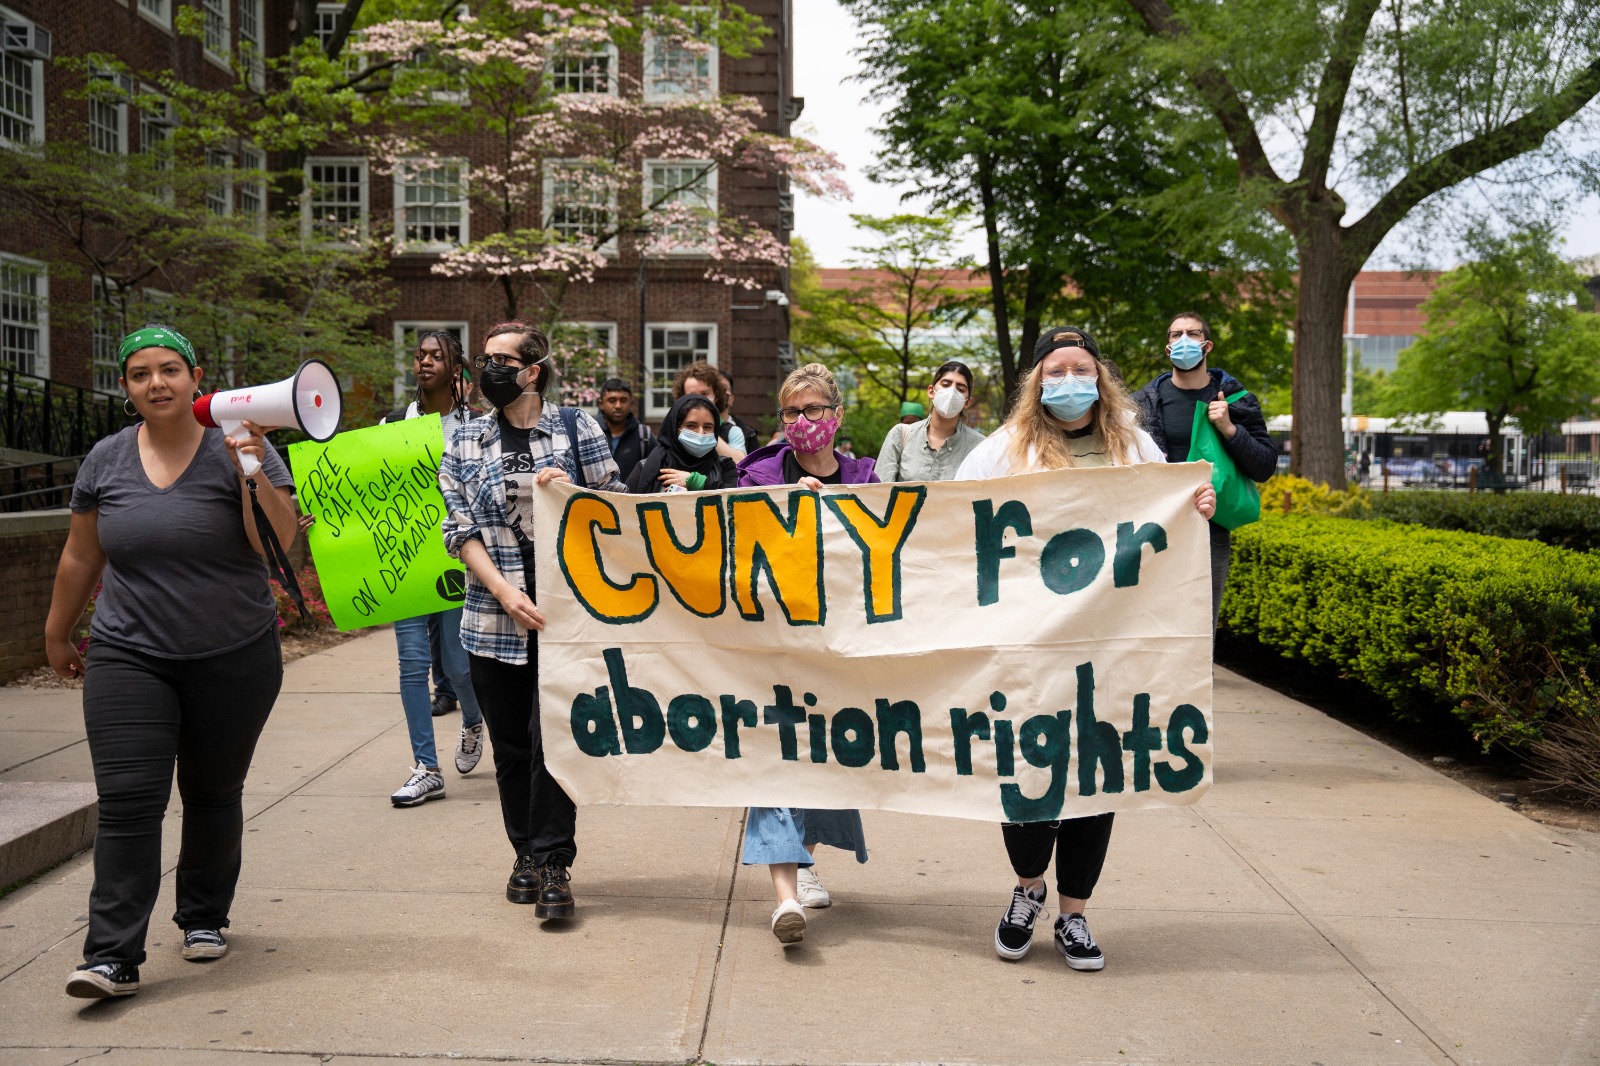 Protesters rally outside Brooklyn College on Friday, May 13. A banner reads "CUNY for abortion rights."